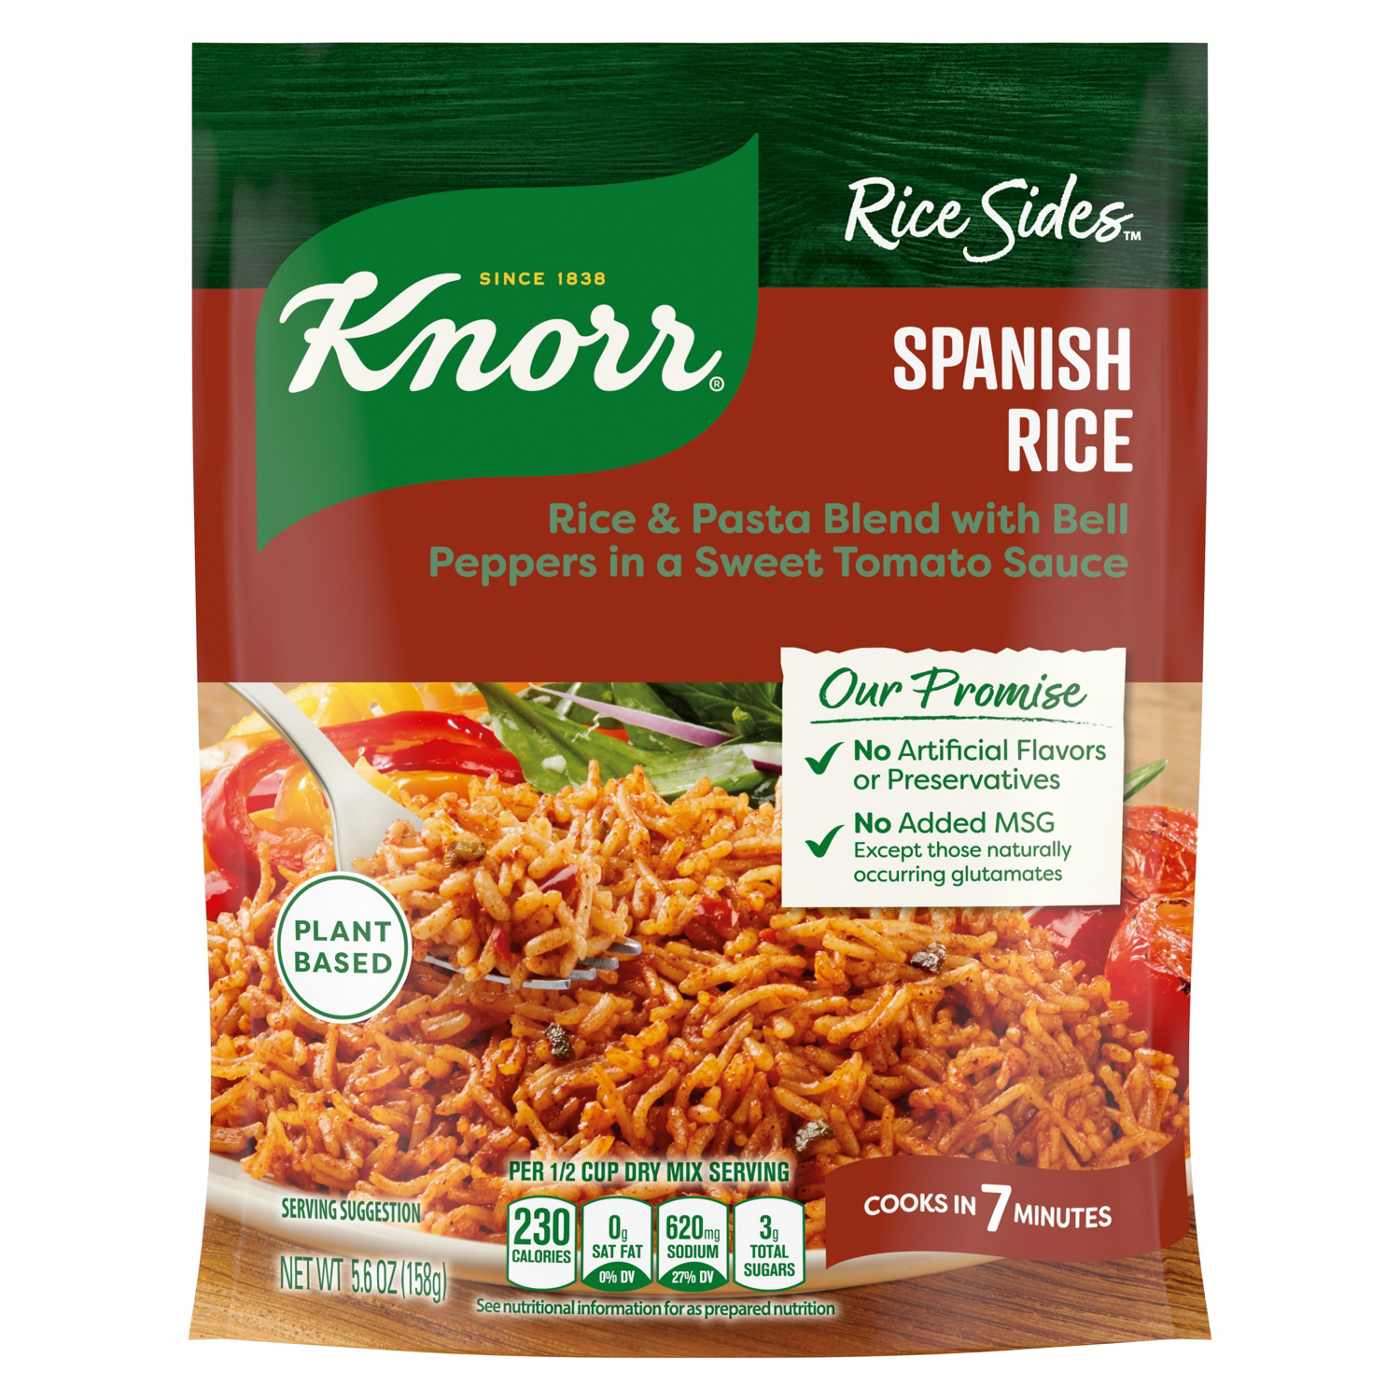 Knorr Rice Sides Spanish Rice; image 1 of 7